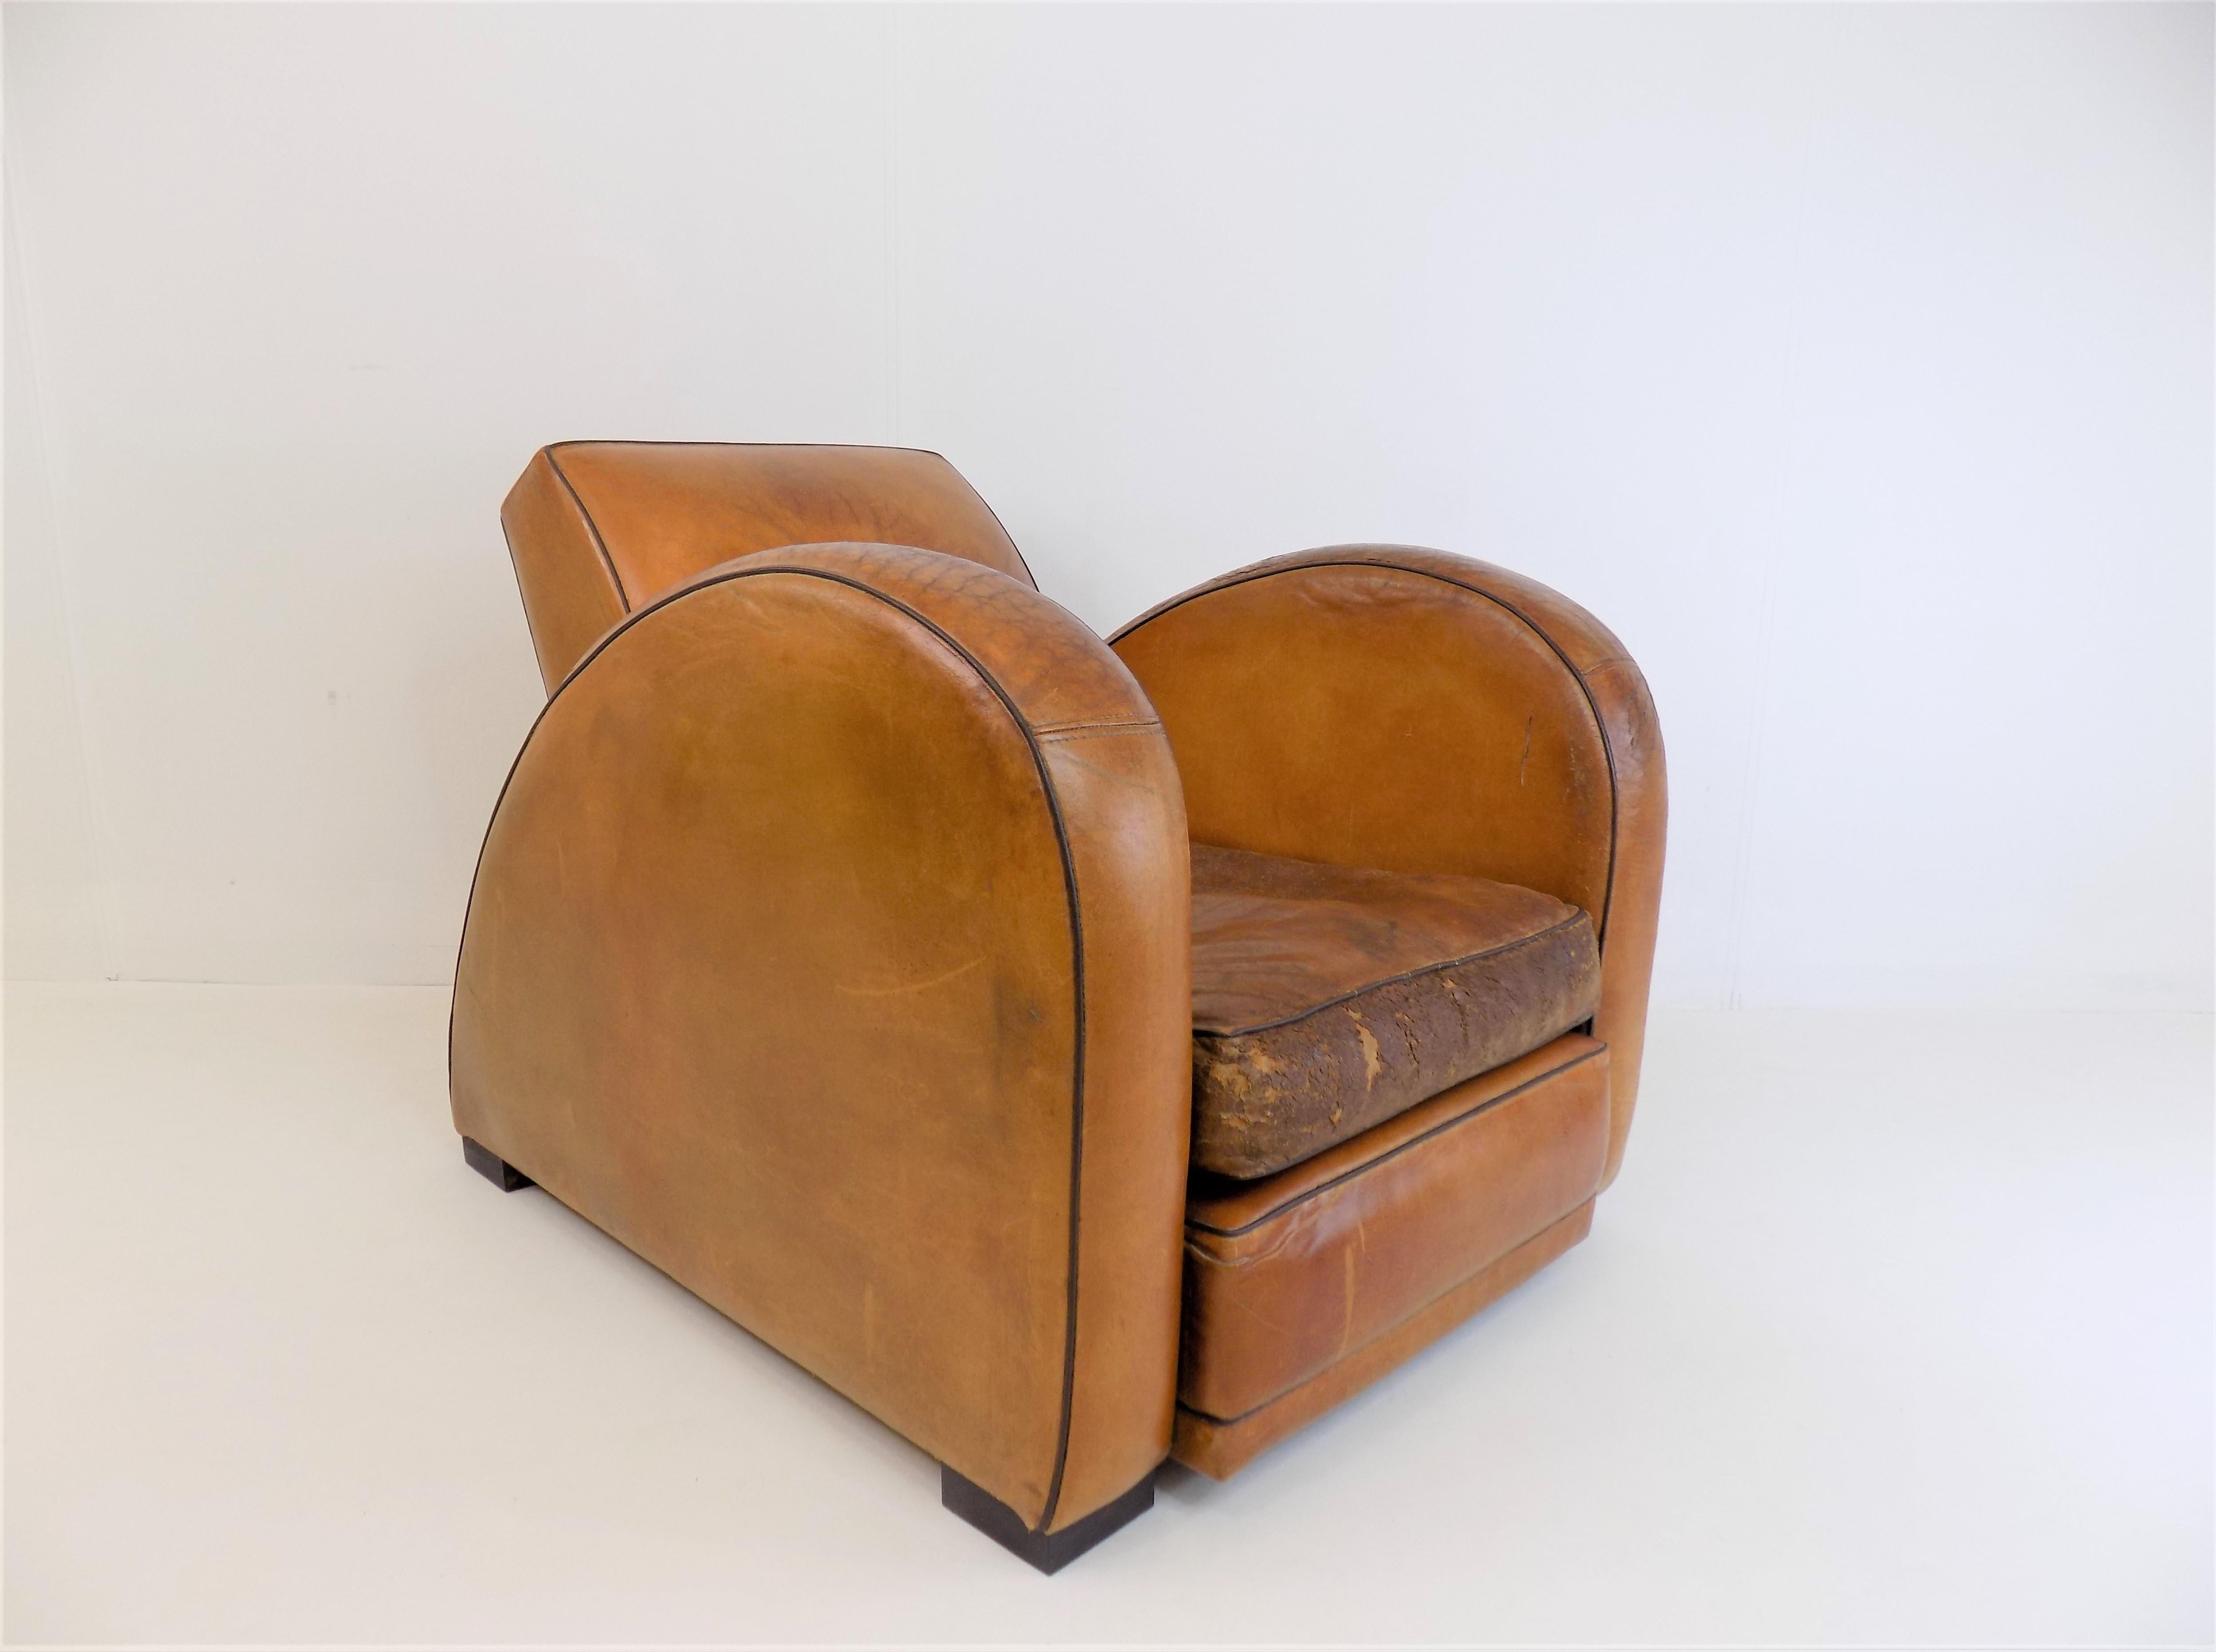 More sculpture than armchair, this armchair comes in a cognac-colored leather and immediately dominates any room. The leather has hard earned its patina over the years and has been reinforced from the inside in the front area of the seat cushion to